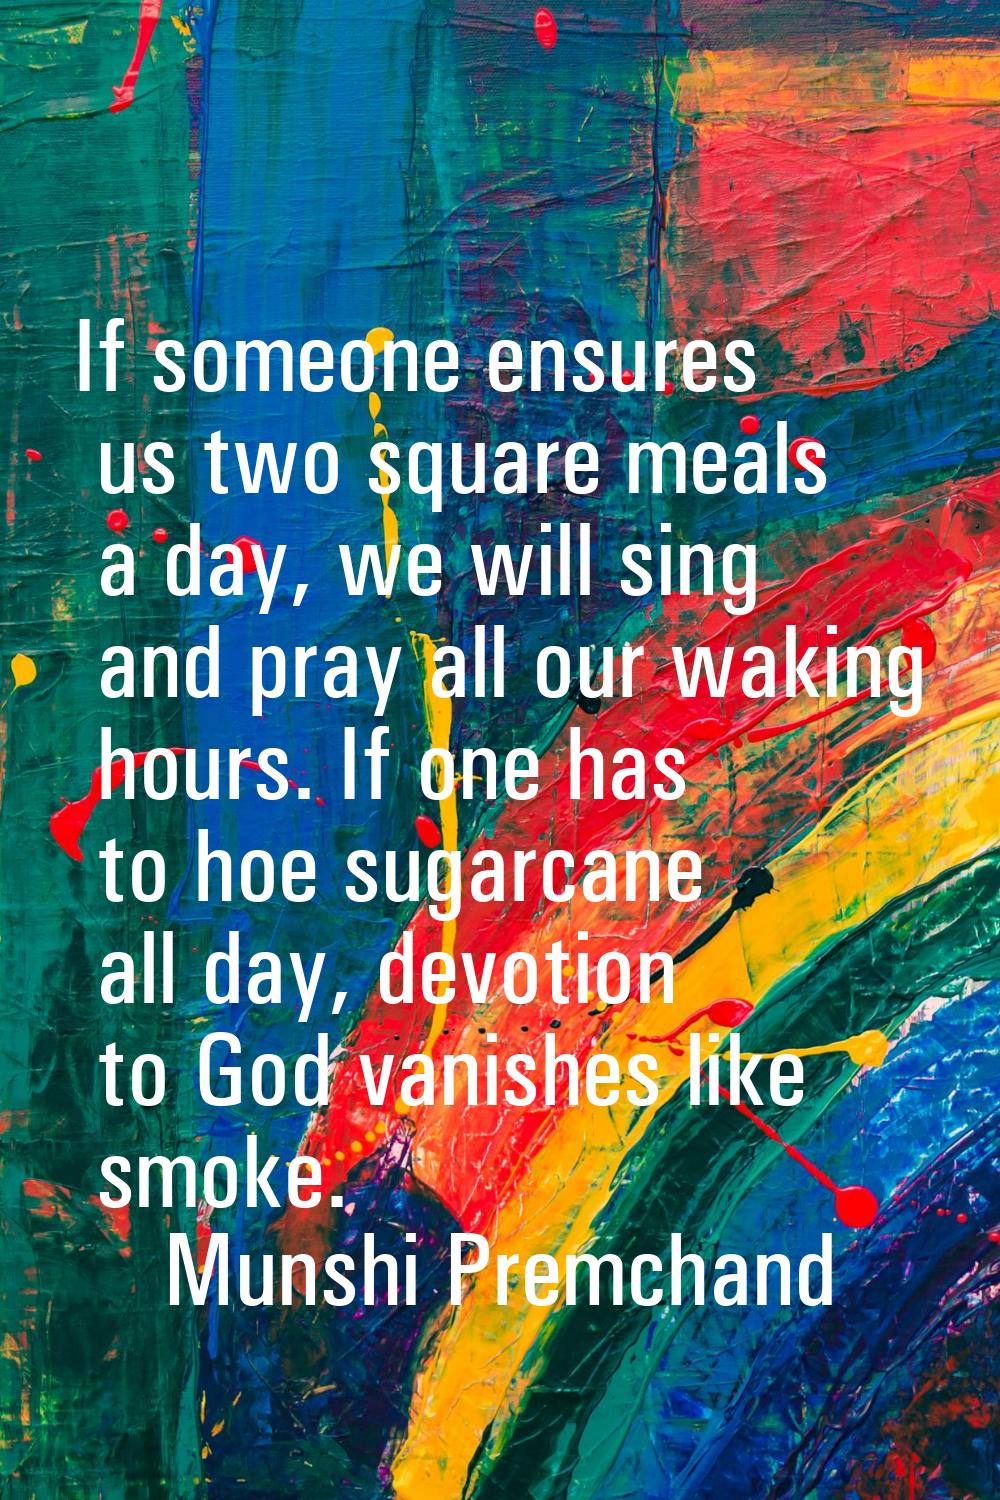 If someone ensures us two square meals a day, we will sing and pray all our waking hours. If one ha